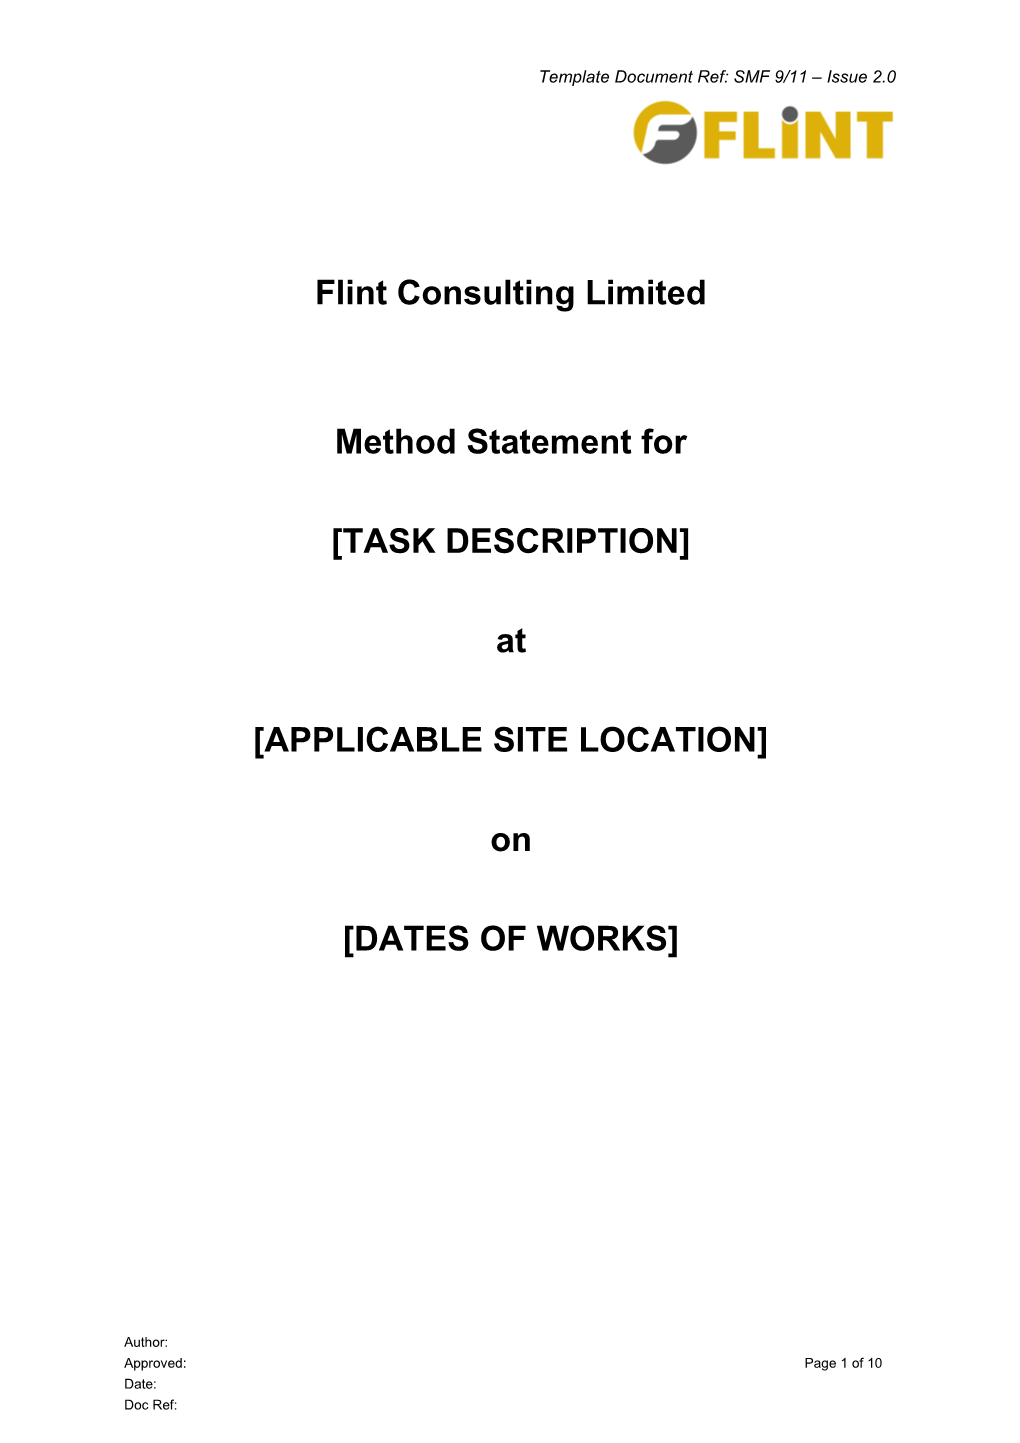 Flint Consulting Limited